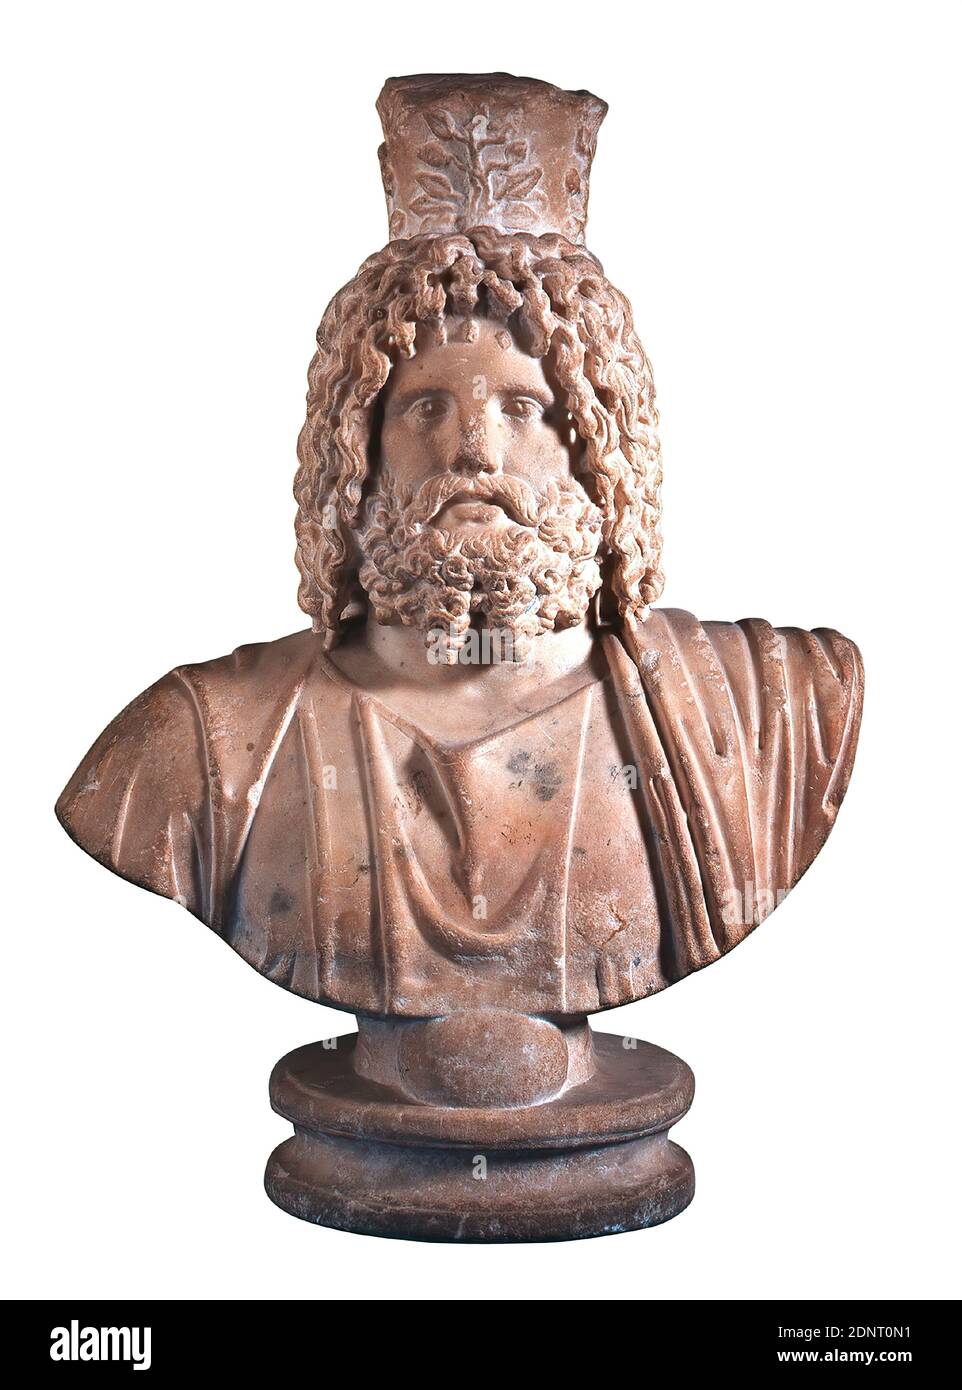 Bust of the god Sarapis, Marble, chiseled, Marble, chiseled, Total: Height: 48,50 cm; Width: 34,50 cm; Depth: 20,00 cm, Three-dimensional sculptures, Serapis, Egyptian gods, demigods, heroes, Middle Empire, Roman copy after a Greek original. Originally intended for a niche installation, this sculpture reproduces one of the most frequently copied works of antique sculpture in a bust cutout and in a strong reduction: The famous large cult statue in the Alexandrian sanctuary of Sarapis, dating from around 300 B.C. Stock Photo